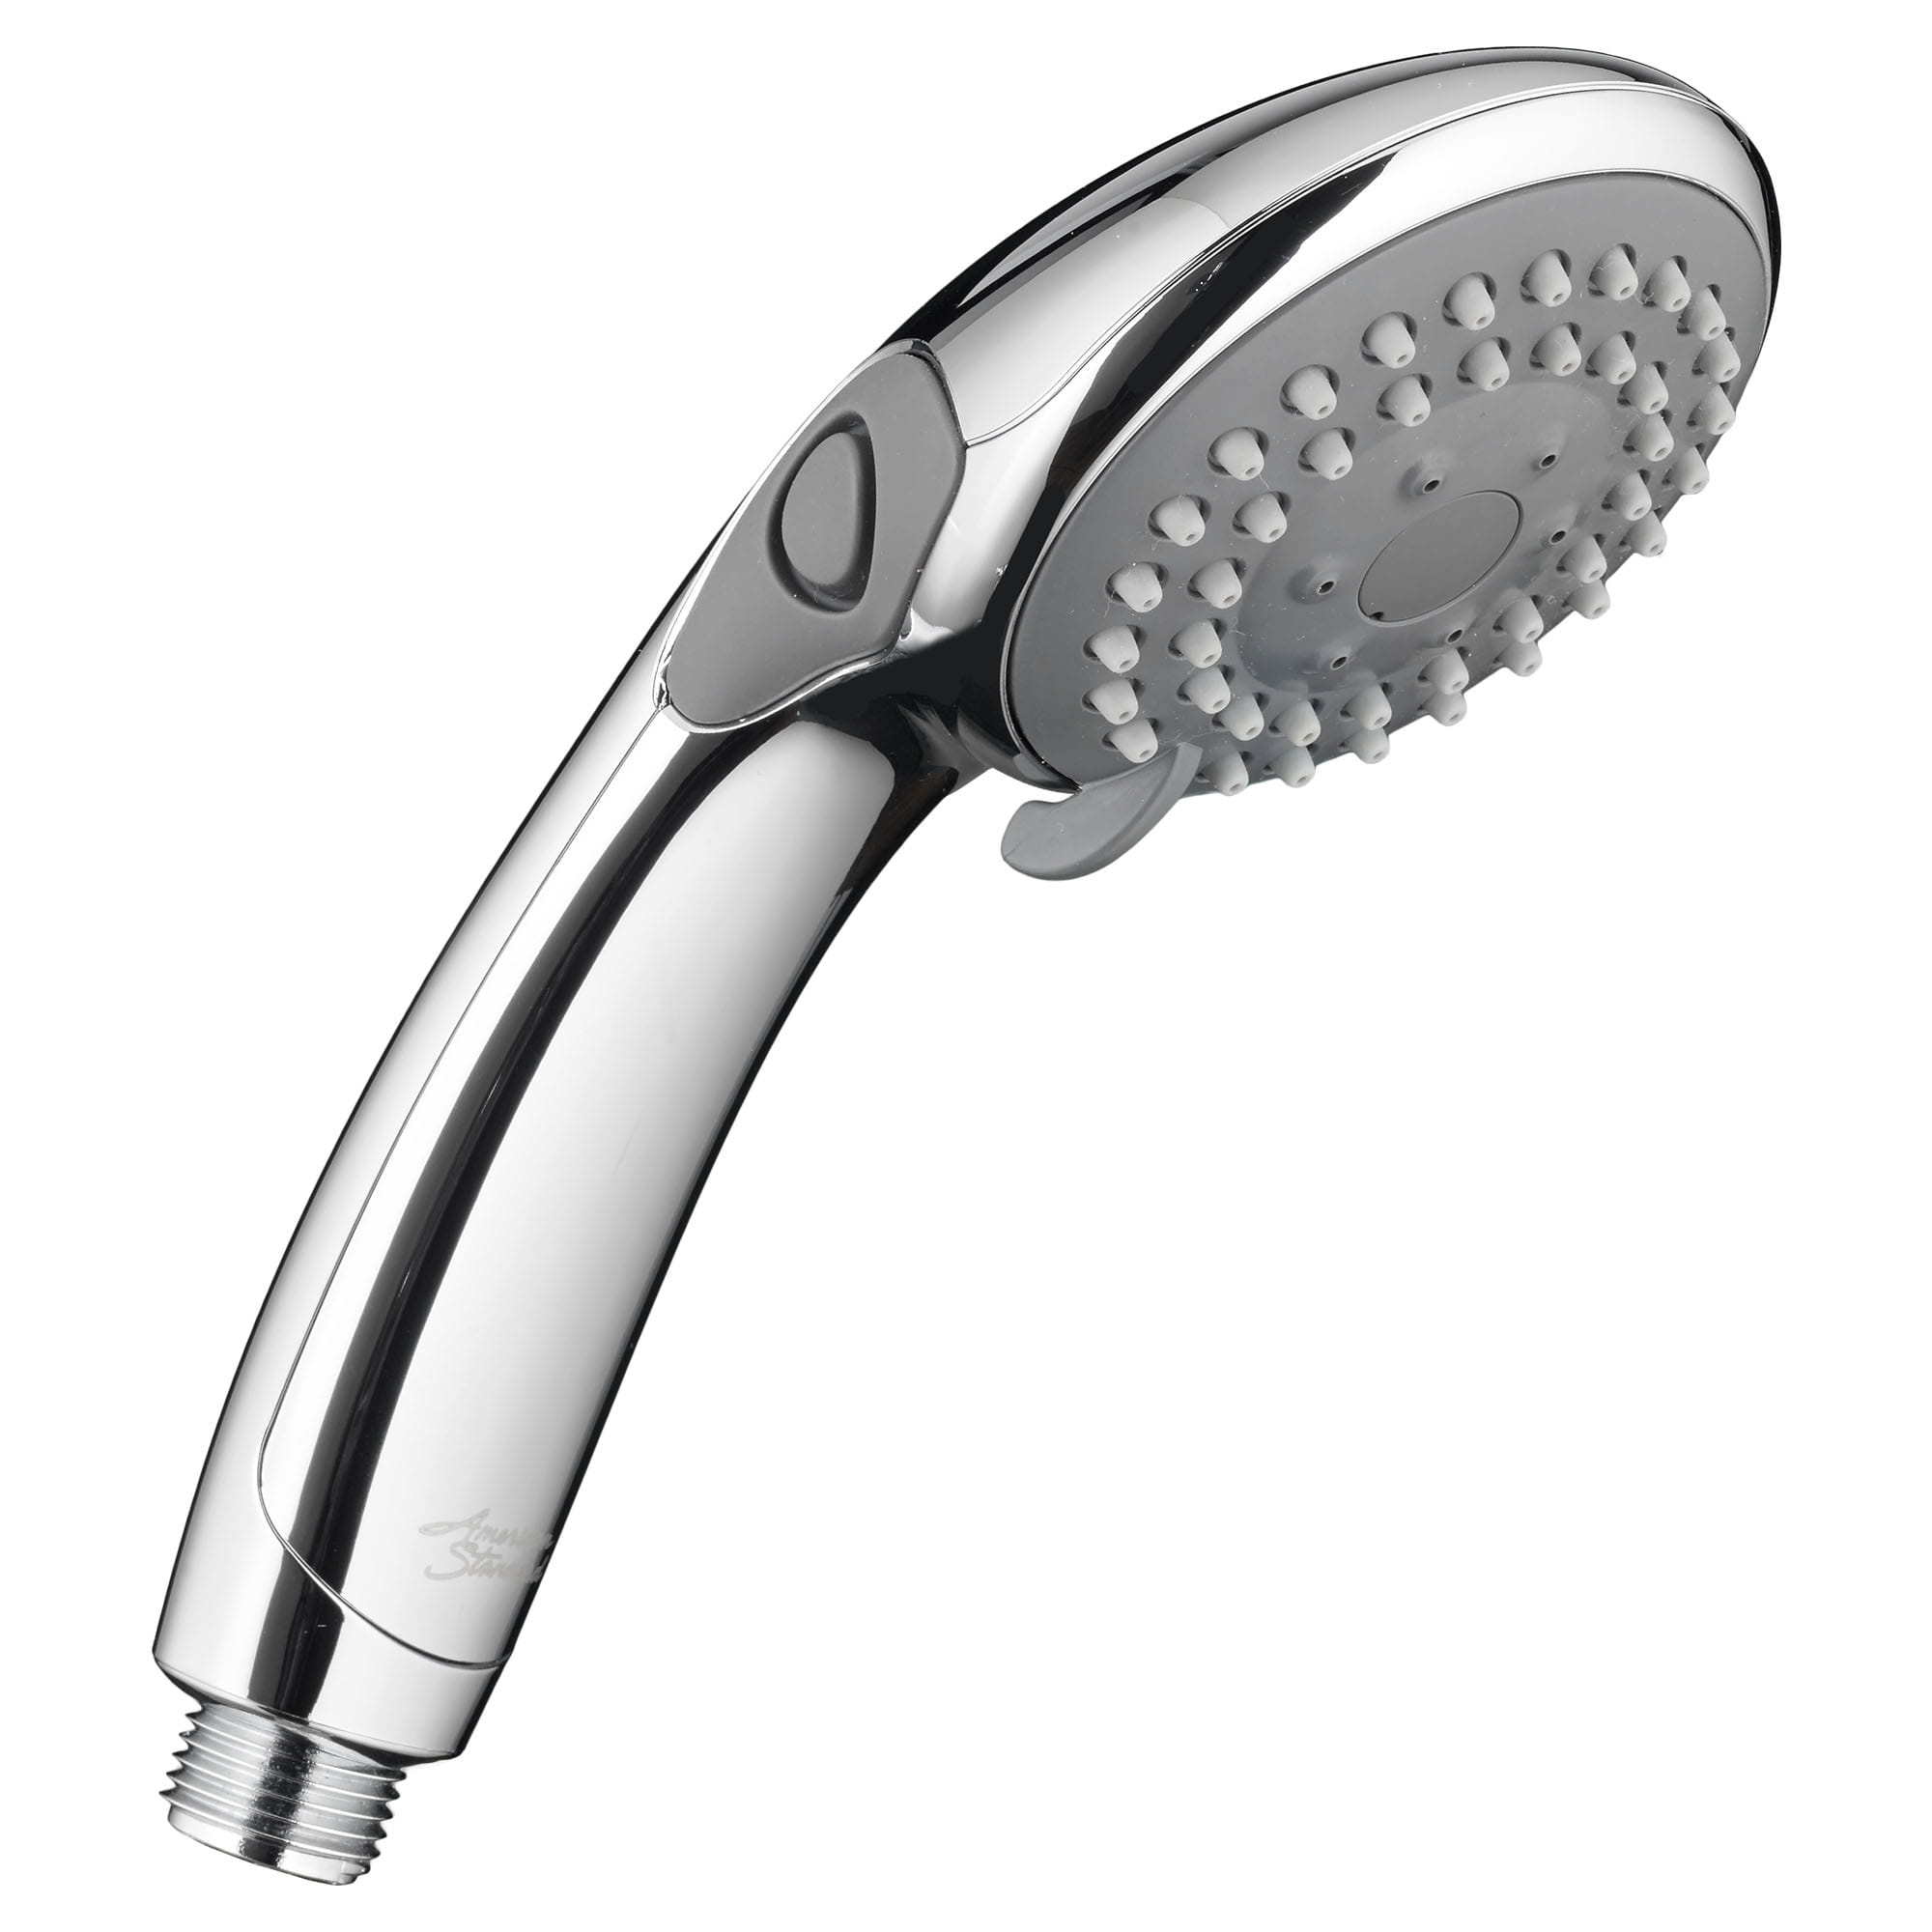 2.5 gpm/9.5 Lpf 3-Function Hand Shower With Pause Feature